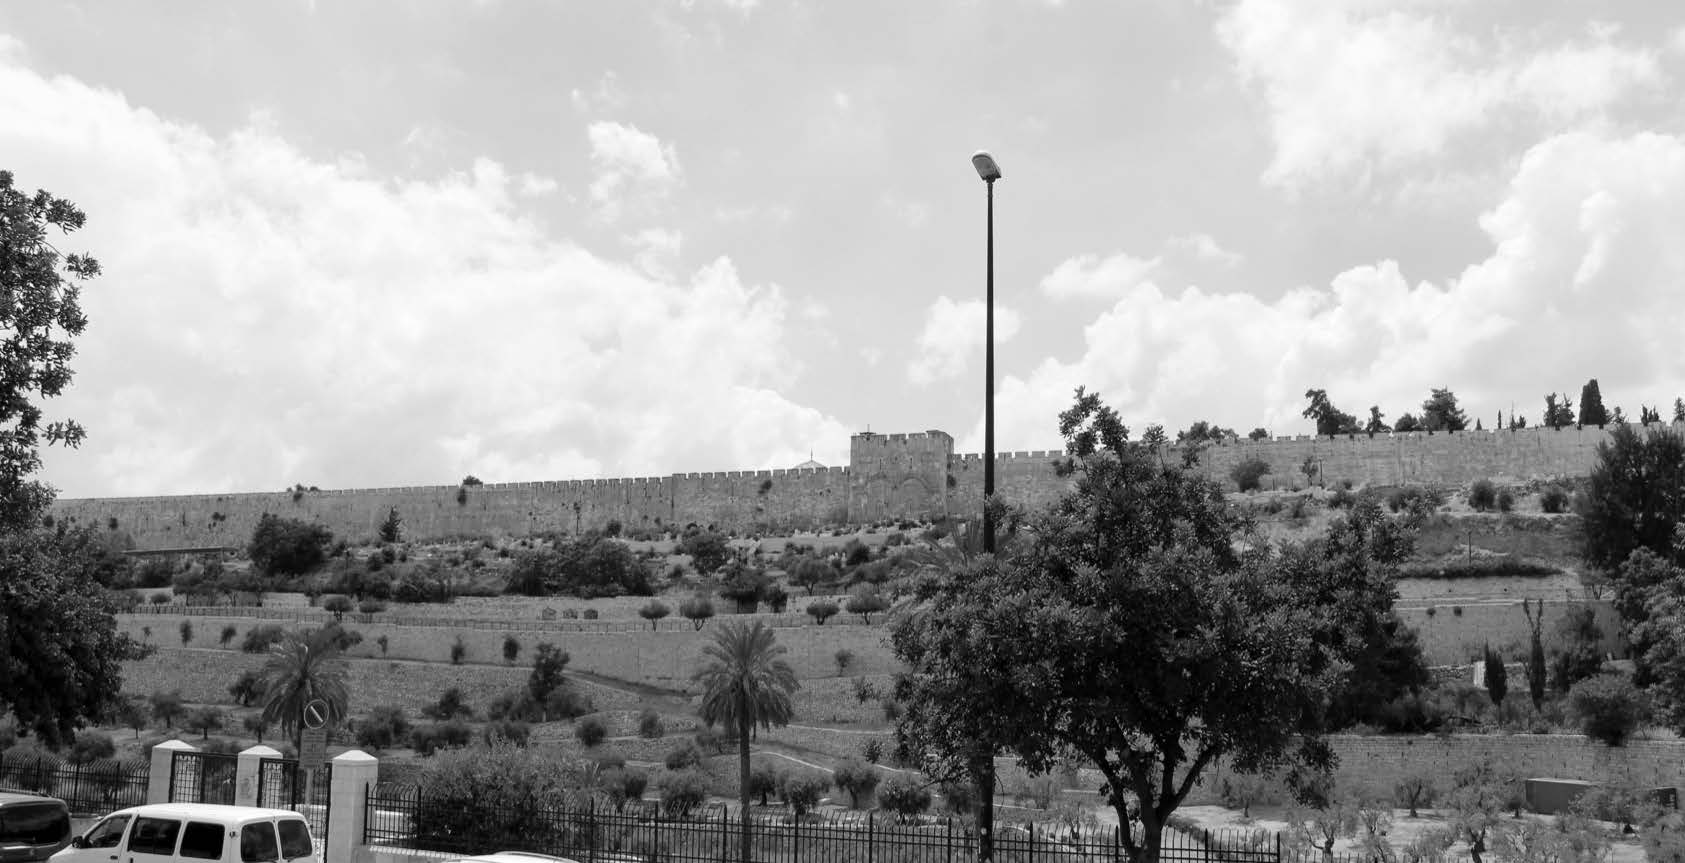 Figure 19. View of the temple’s eastern gate (the Golden Gate) from the Kidron, just outside Gethsemane looking up the hill toward the west. The tip of the Dome of the Rock can be seen in the center of the photo.